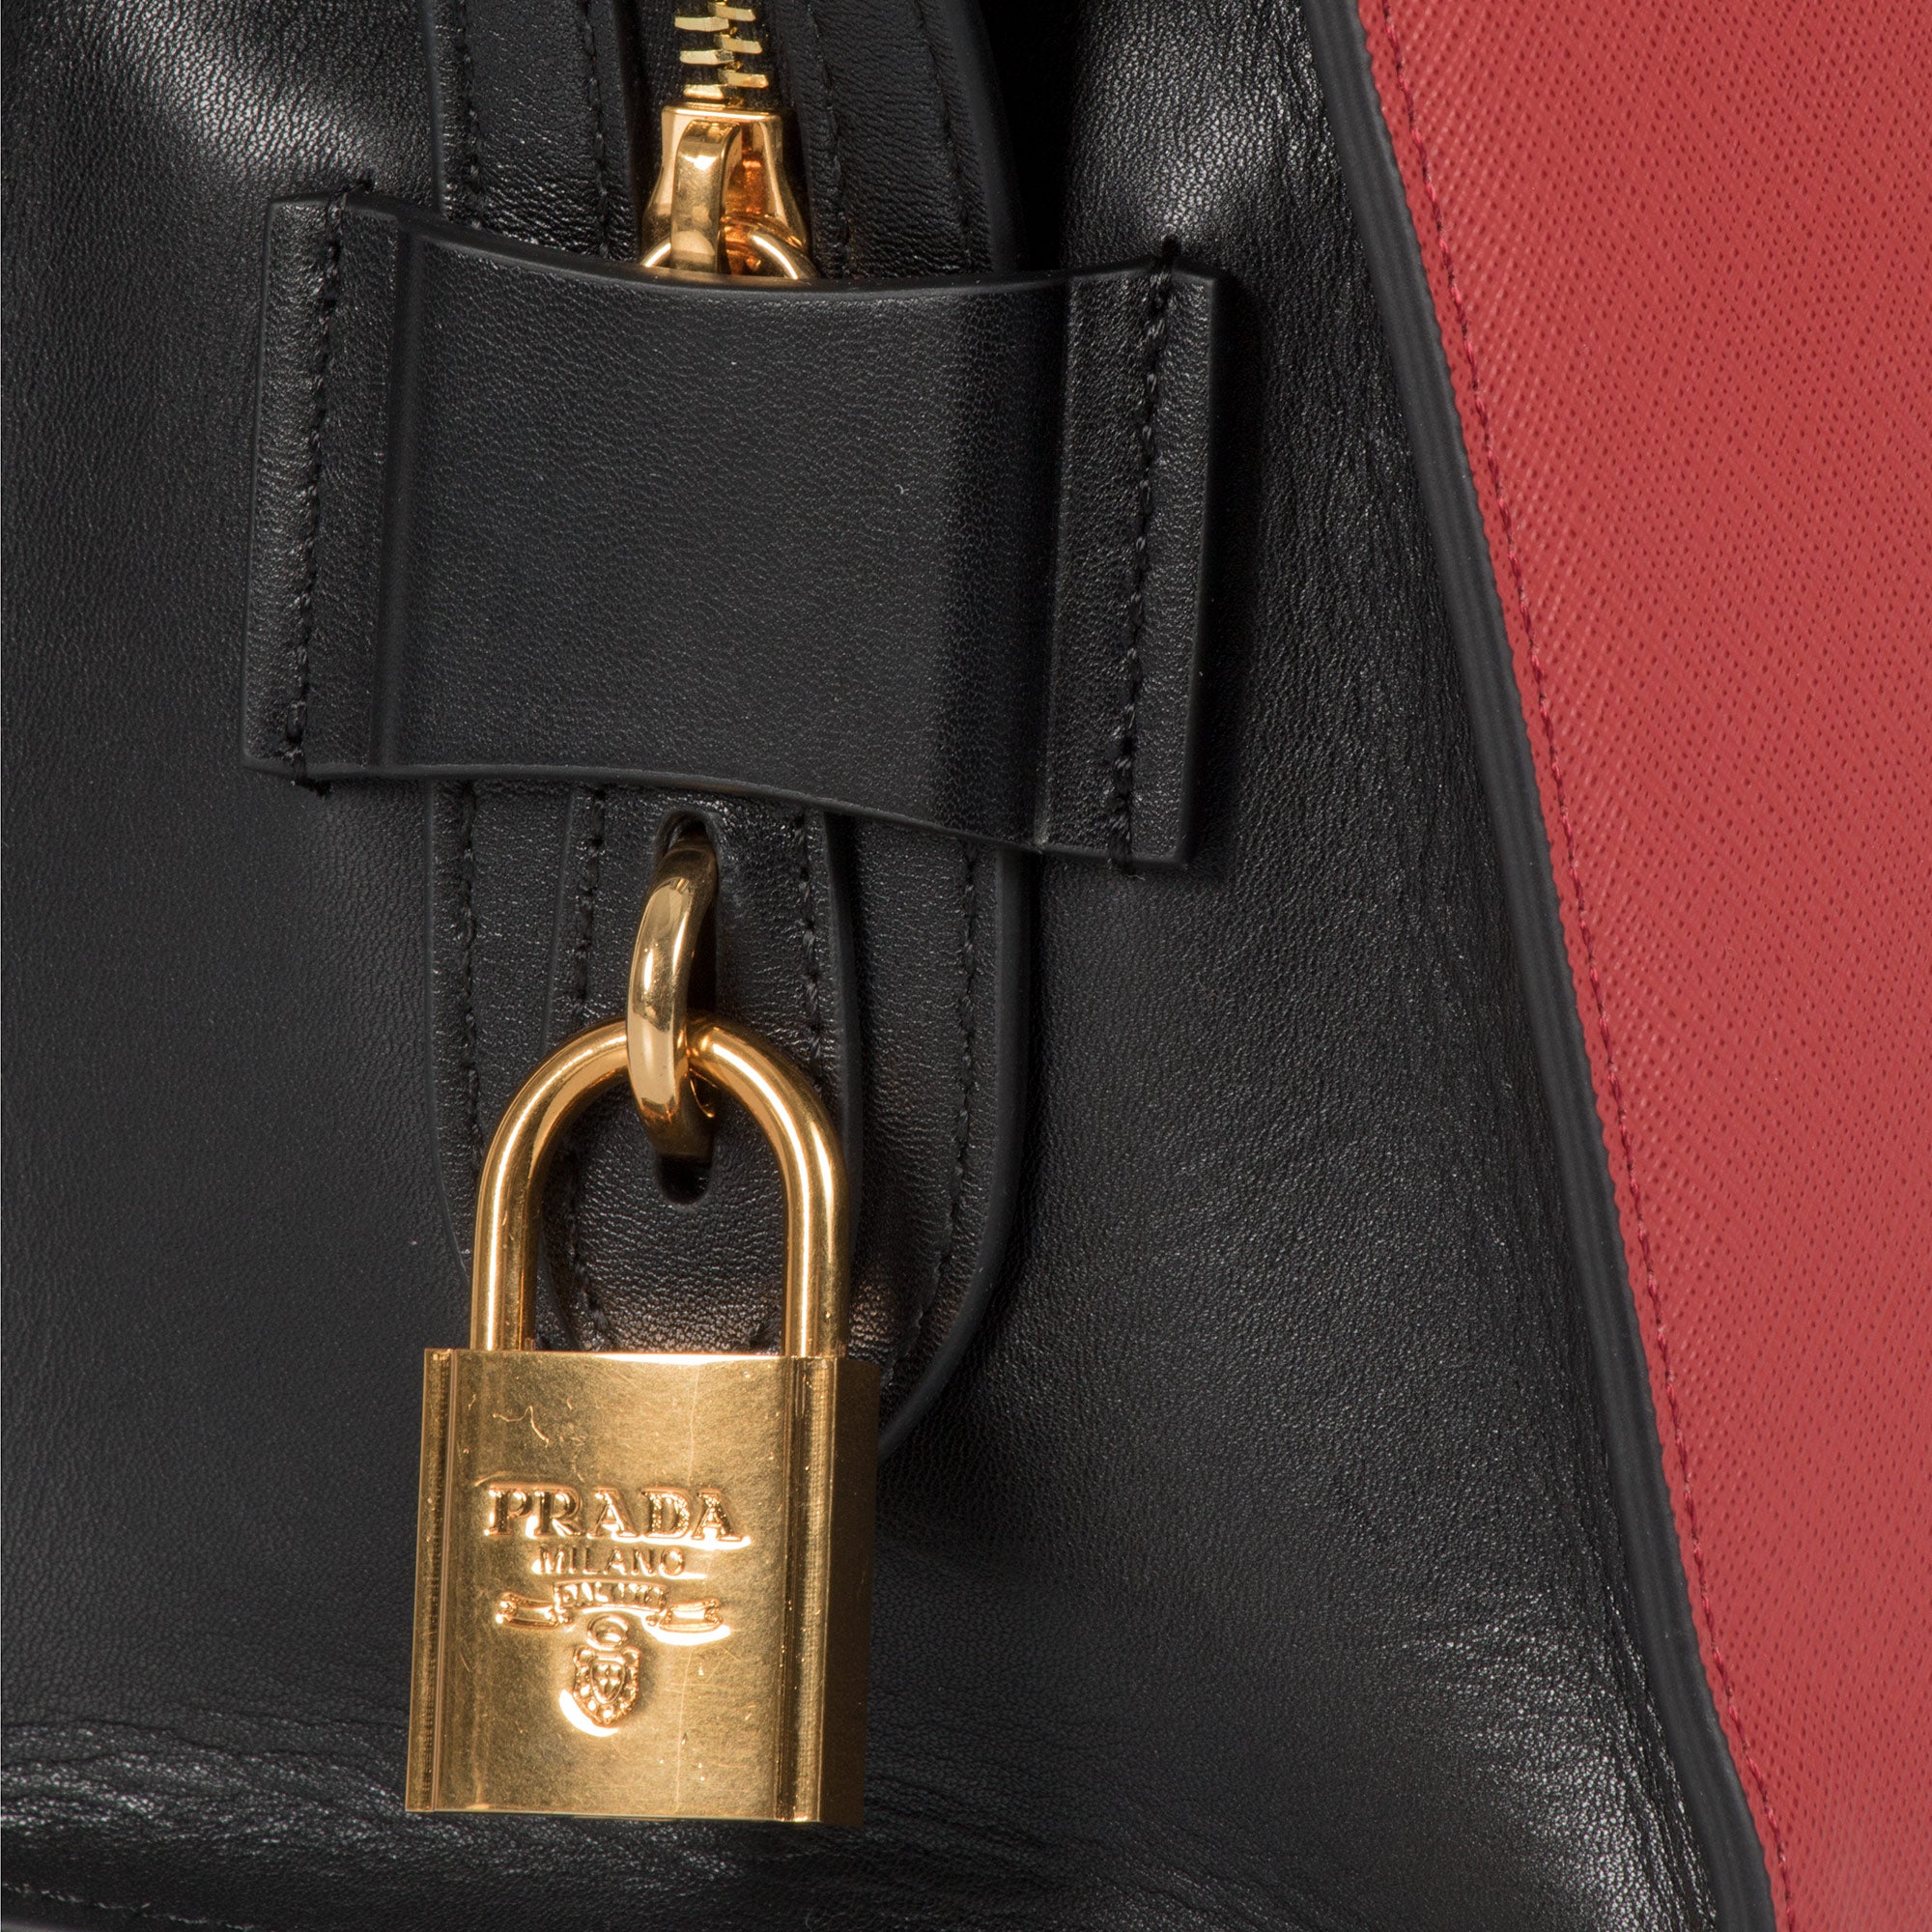 Prada Esplanade Leather Tote In Red and Black – Foxy Luxury